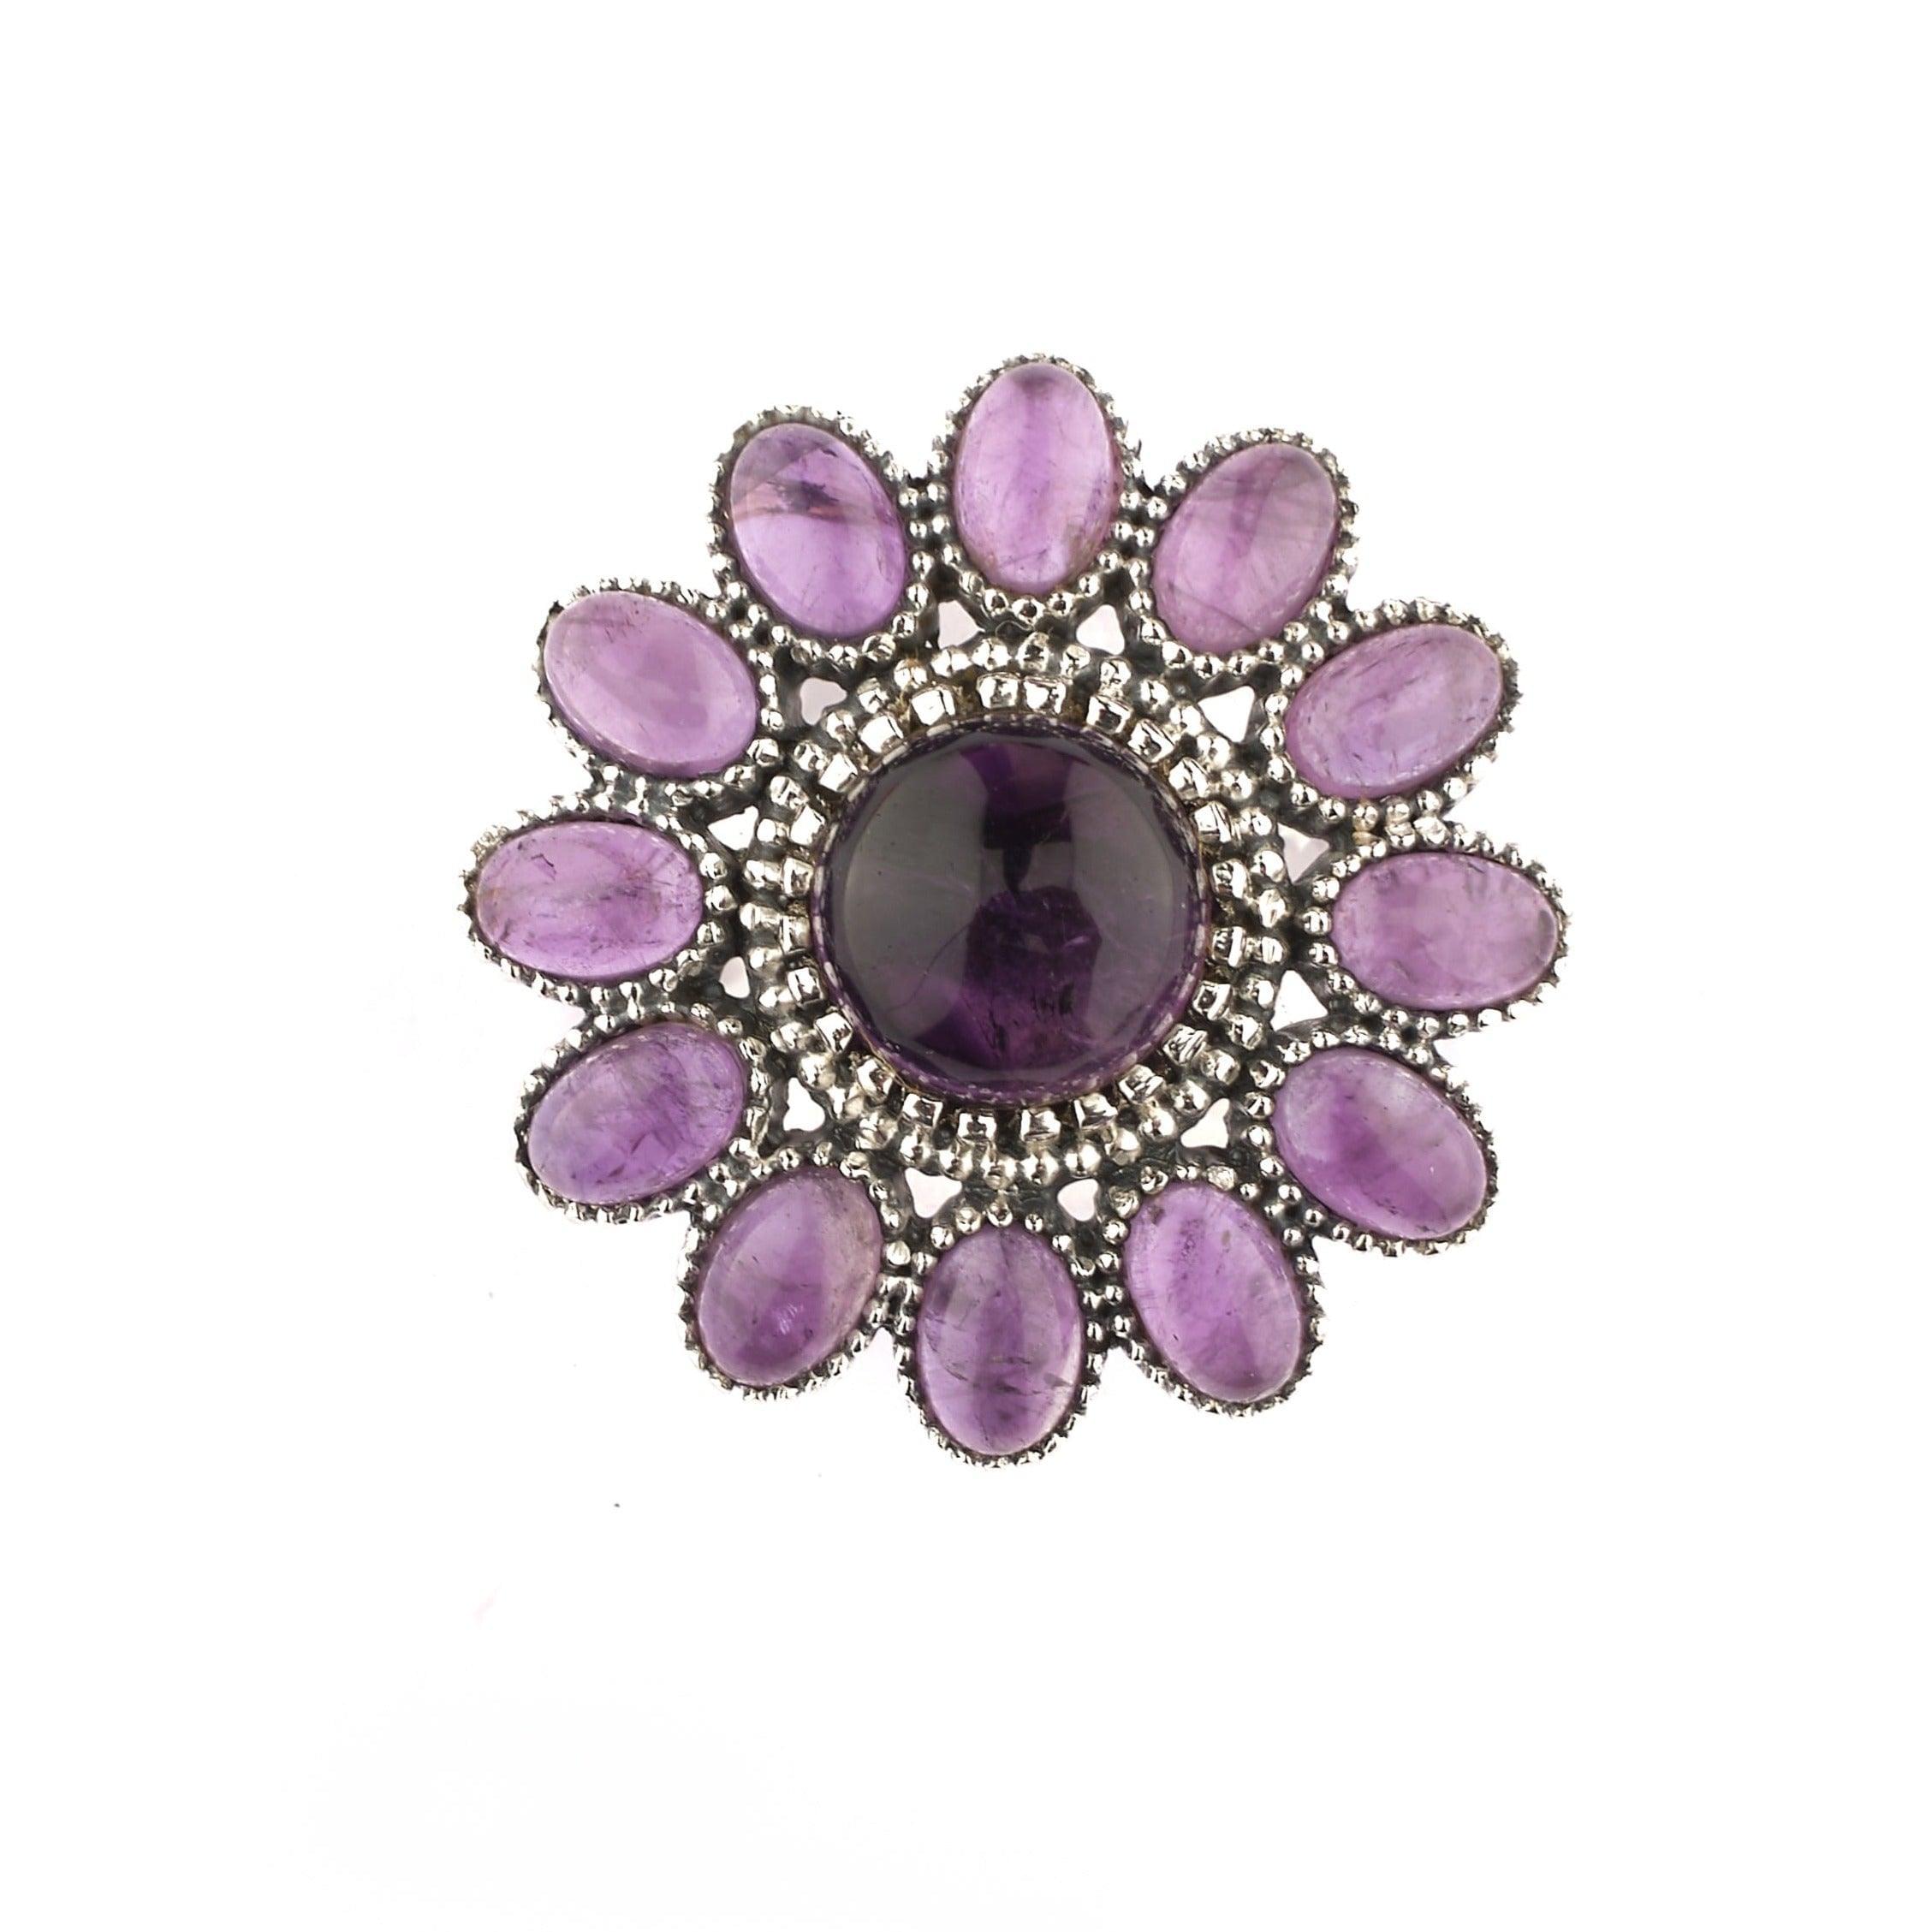 Amethyst Natural Gemstone 925 Solid Sterling Silver Jewelry Designer Adjustable Ring ( Size 5 To 13 ) NEW-03 - Silverhubjewels